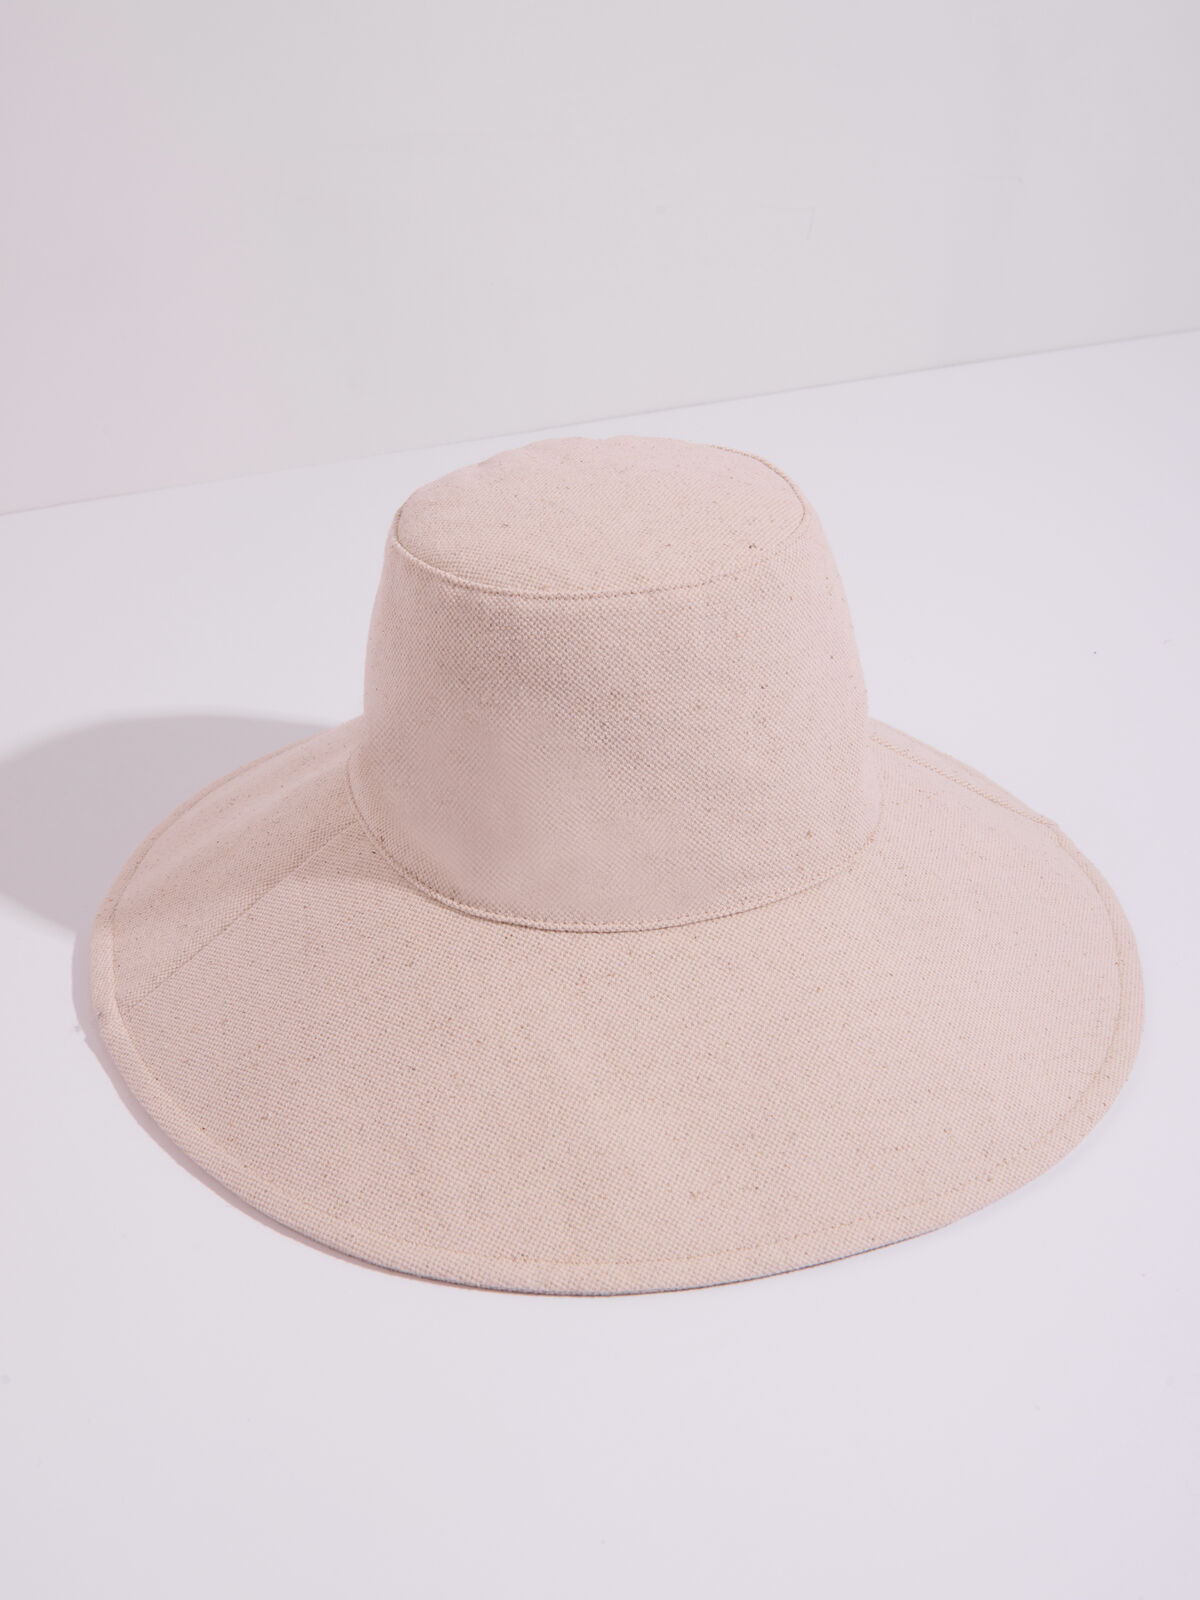 Hat Attack - Simple Sunhat